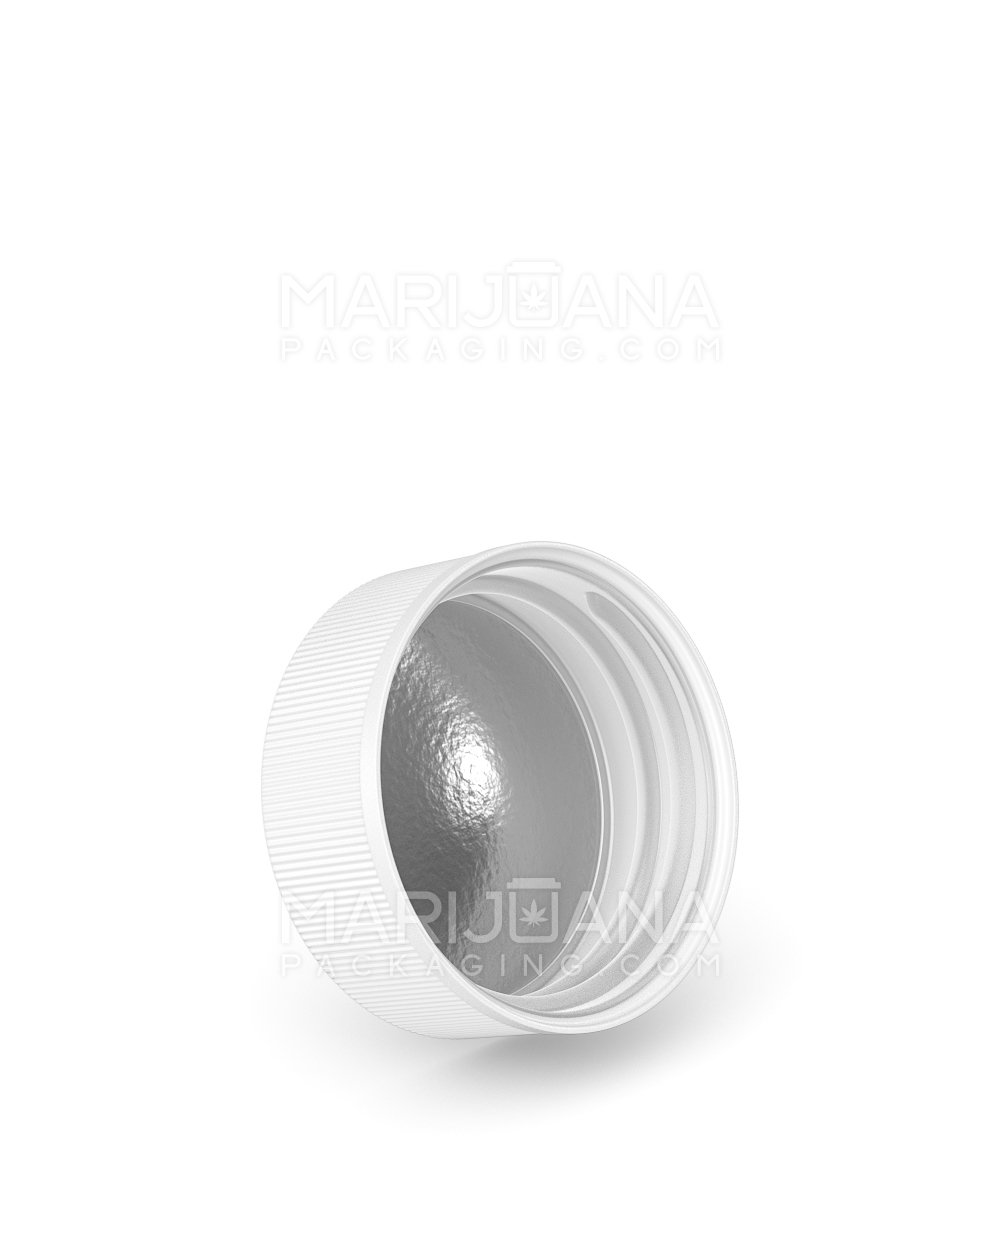 Child Resistant | Ribbed Push Down and Turn Plastic Caps w/ Foil Liner | 38mm - Semi Gloss White - 320 Count - 2